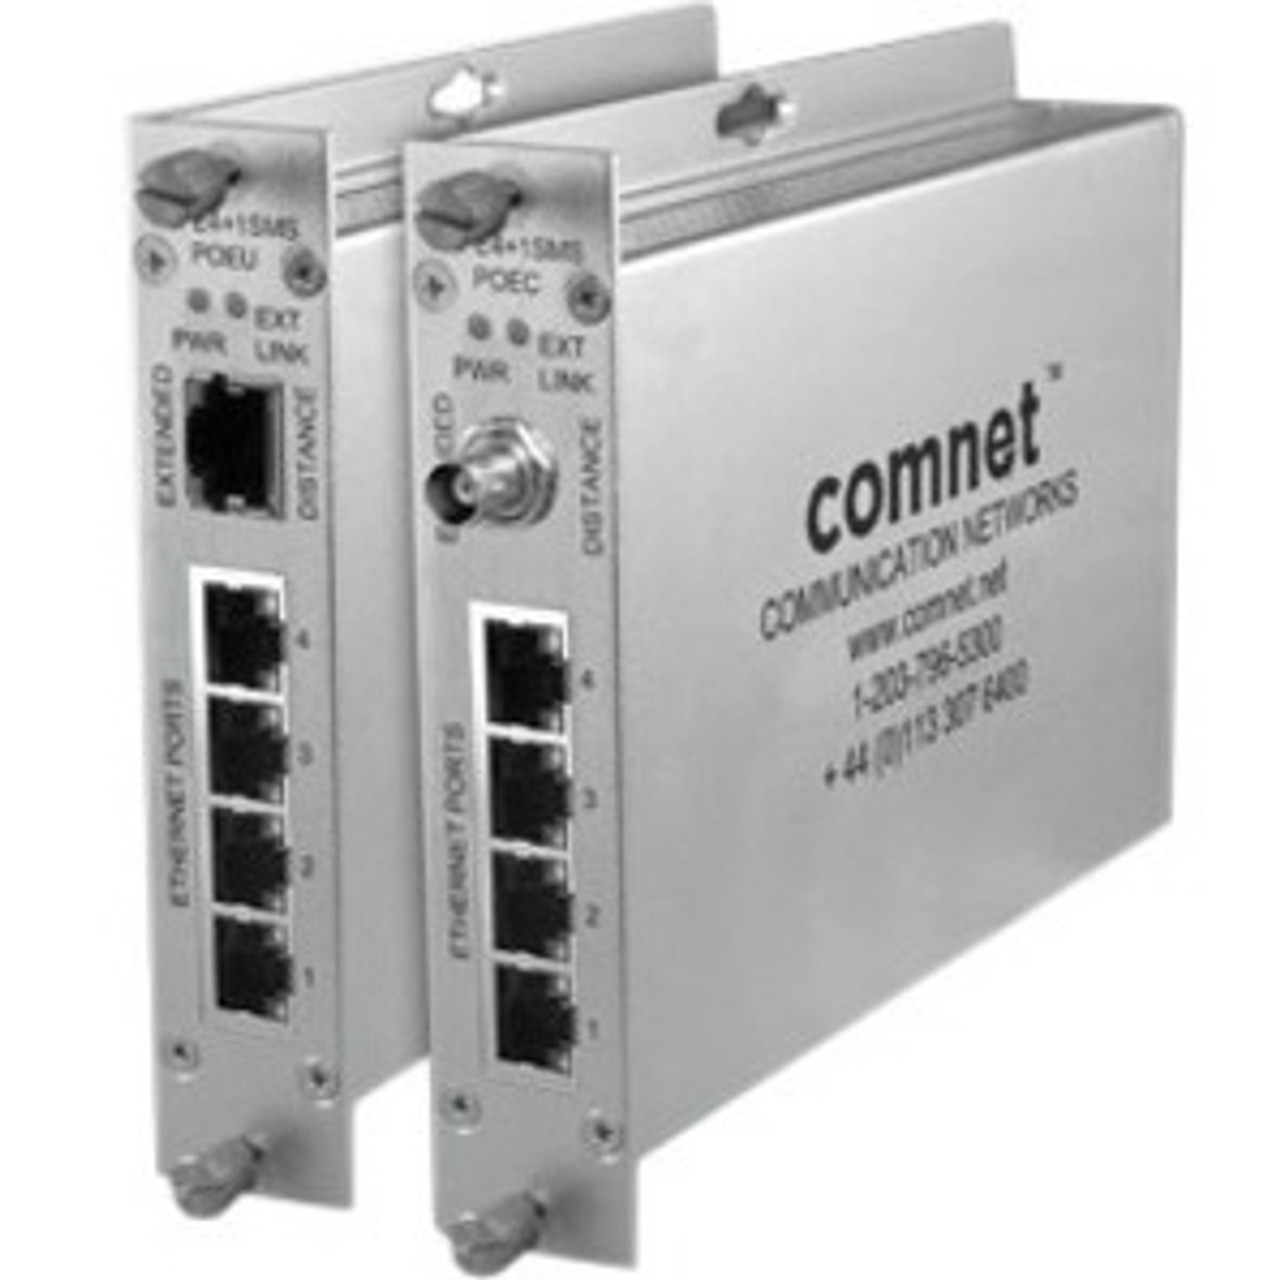 ComNet 10/100 4TX+1EX Ethernet Self-managed Switch with Power over Ethernet (PoE+)